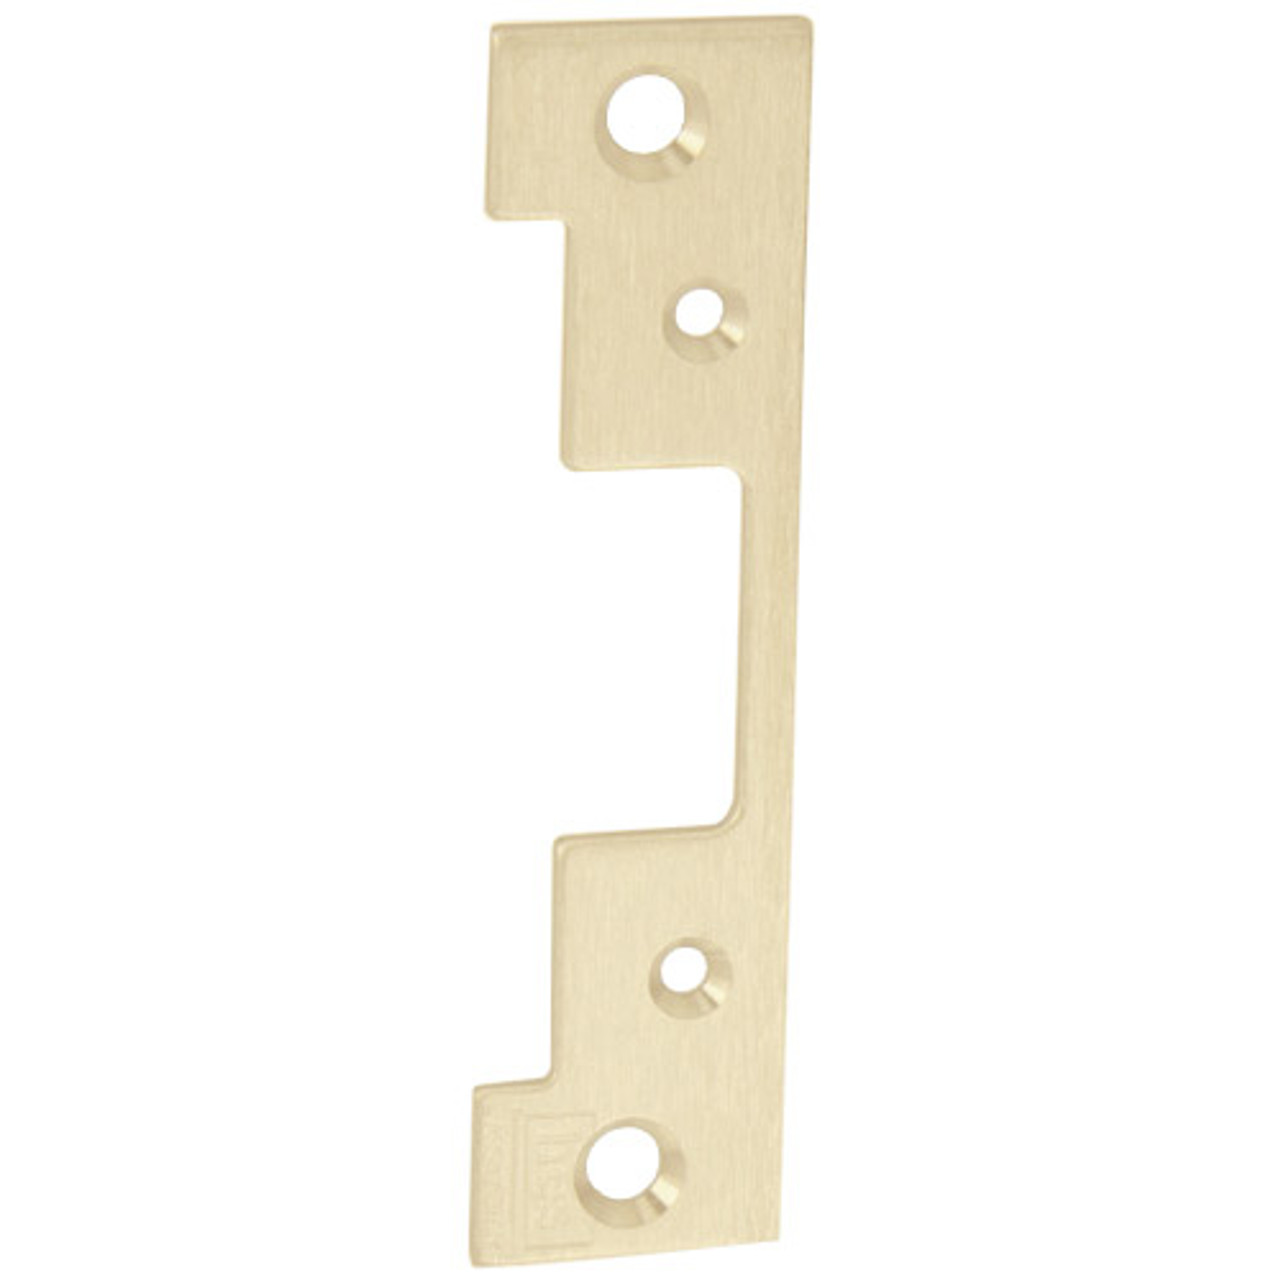 503-606 Hes 6-7/8 x 1-1/4" Faceplate in Satin Brass Finish